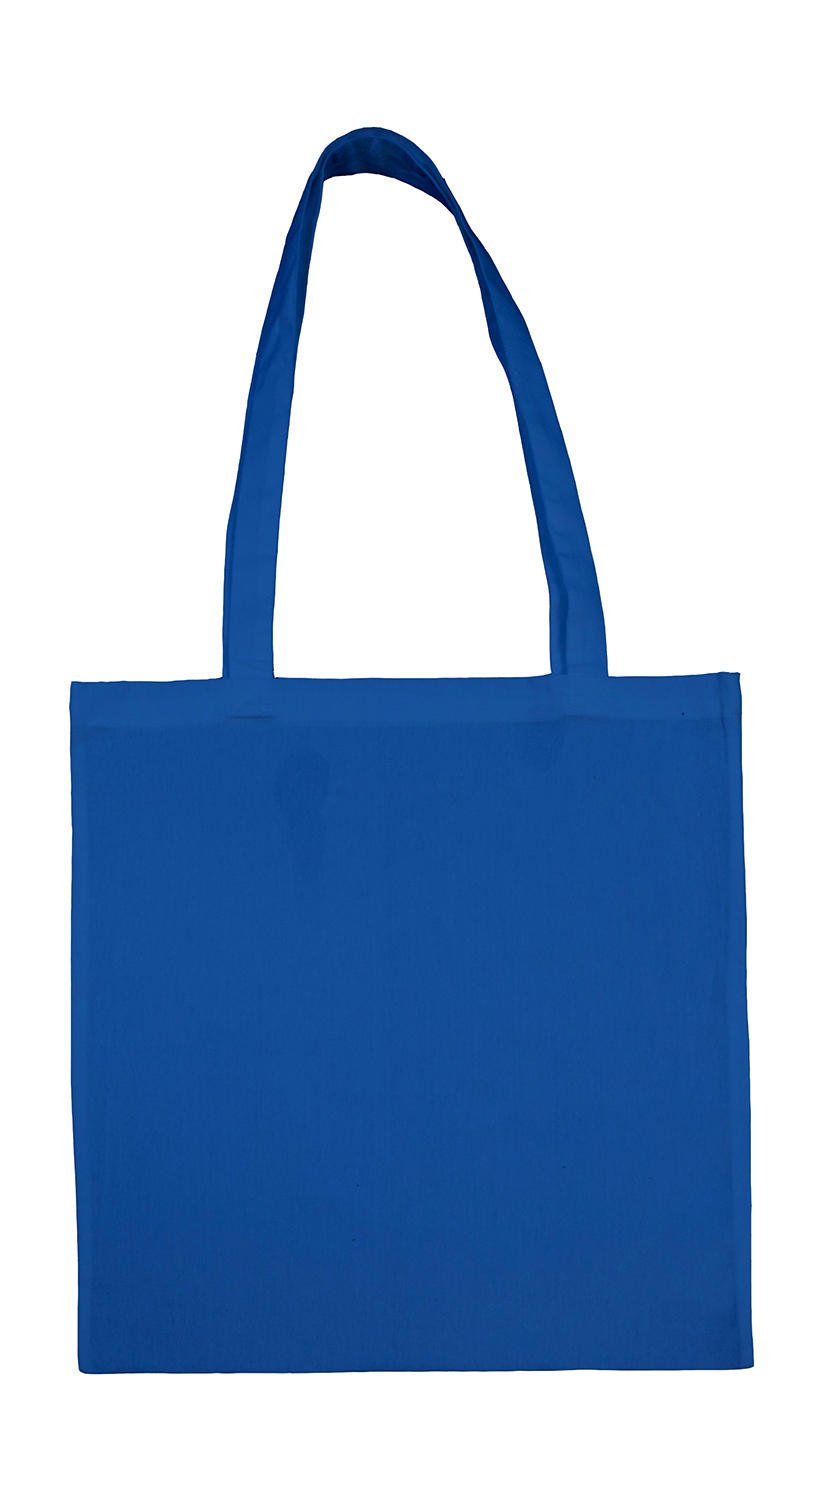  Cotton Bag LH in Farbe Royal